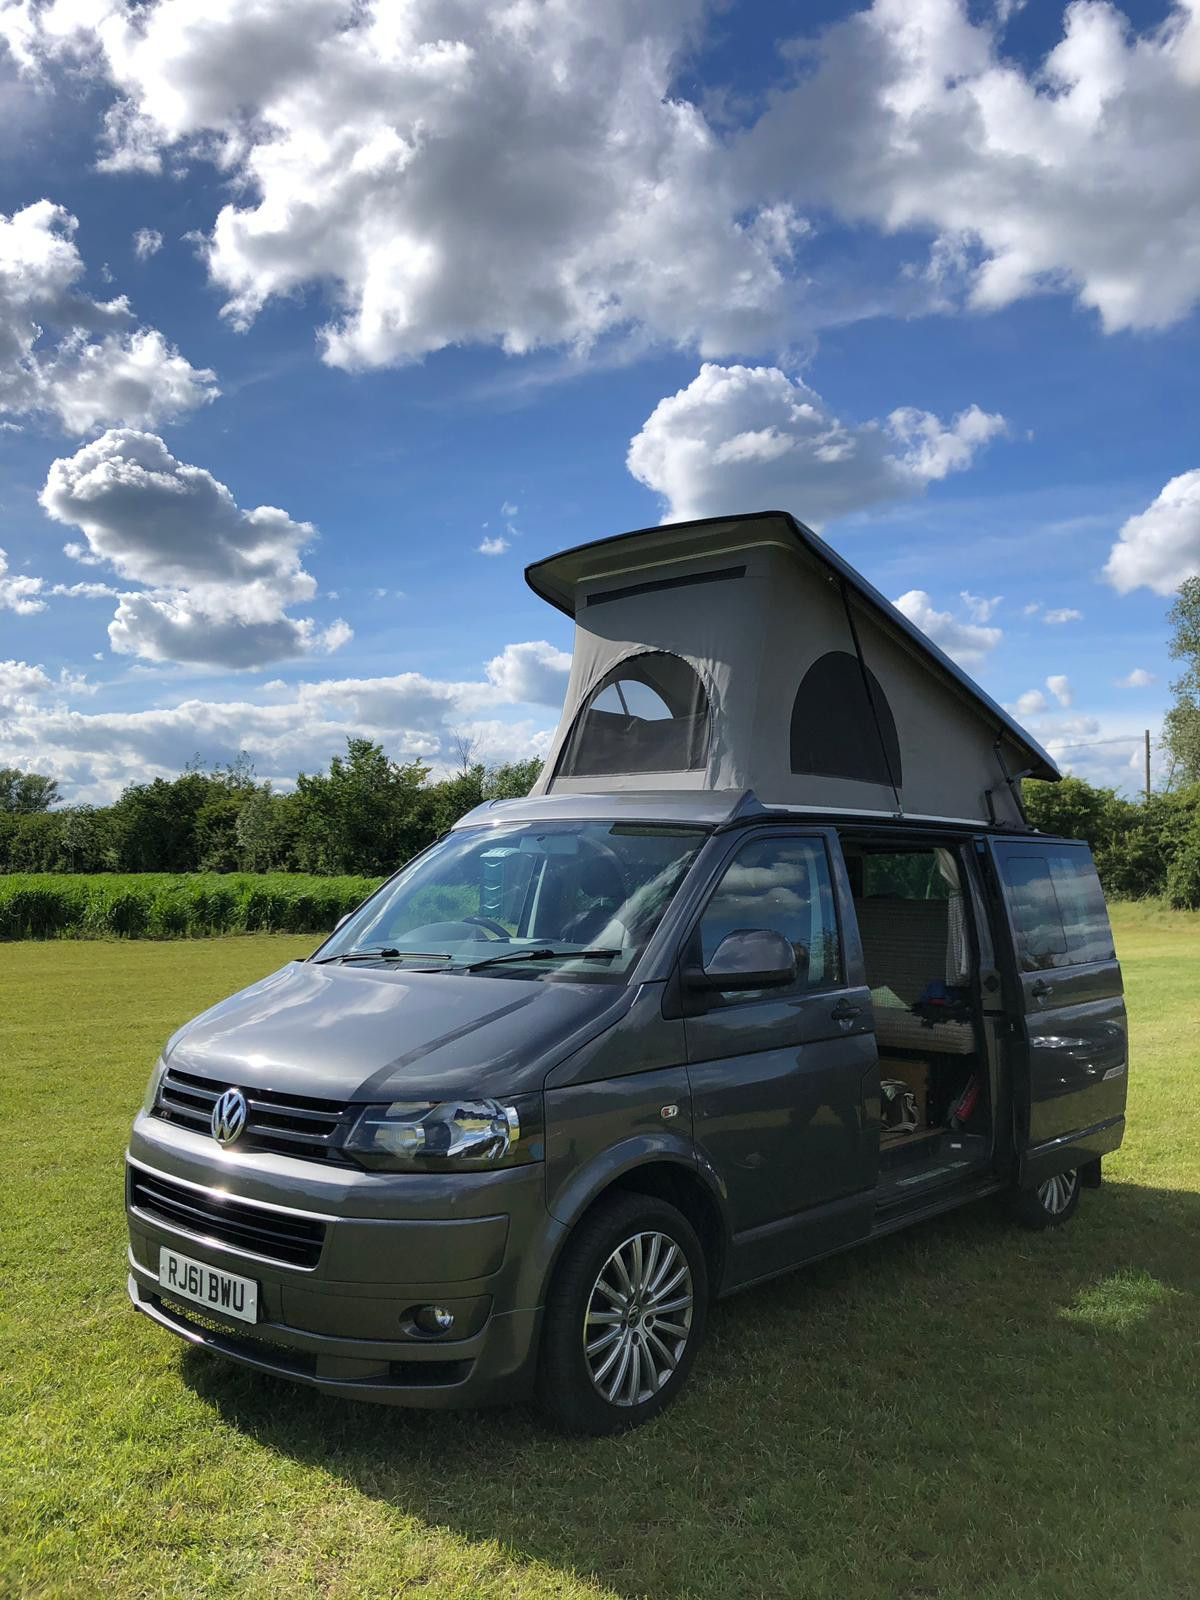 A  Campervan called Bubba and on-site, rood popped and setup in less than 5 minutes, ready to relax for hire in Surrey, Surrey